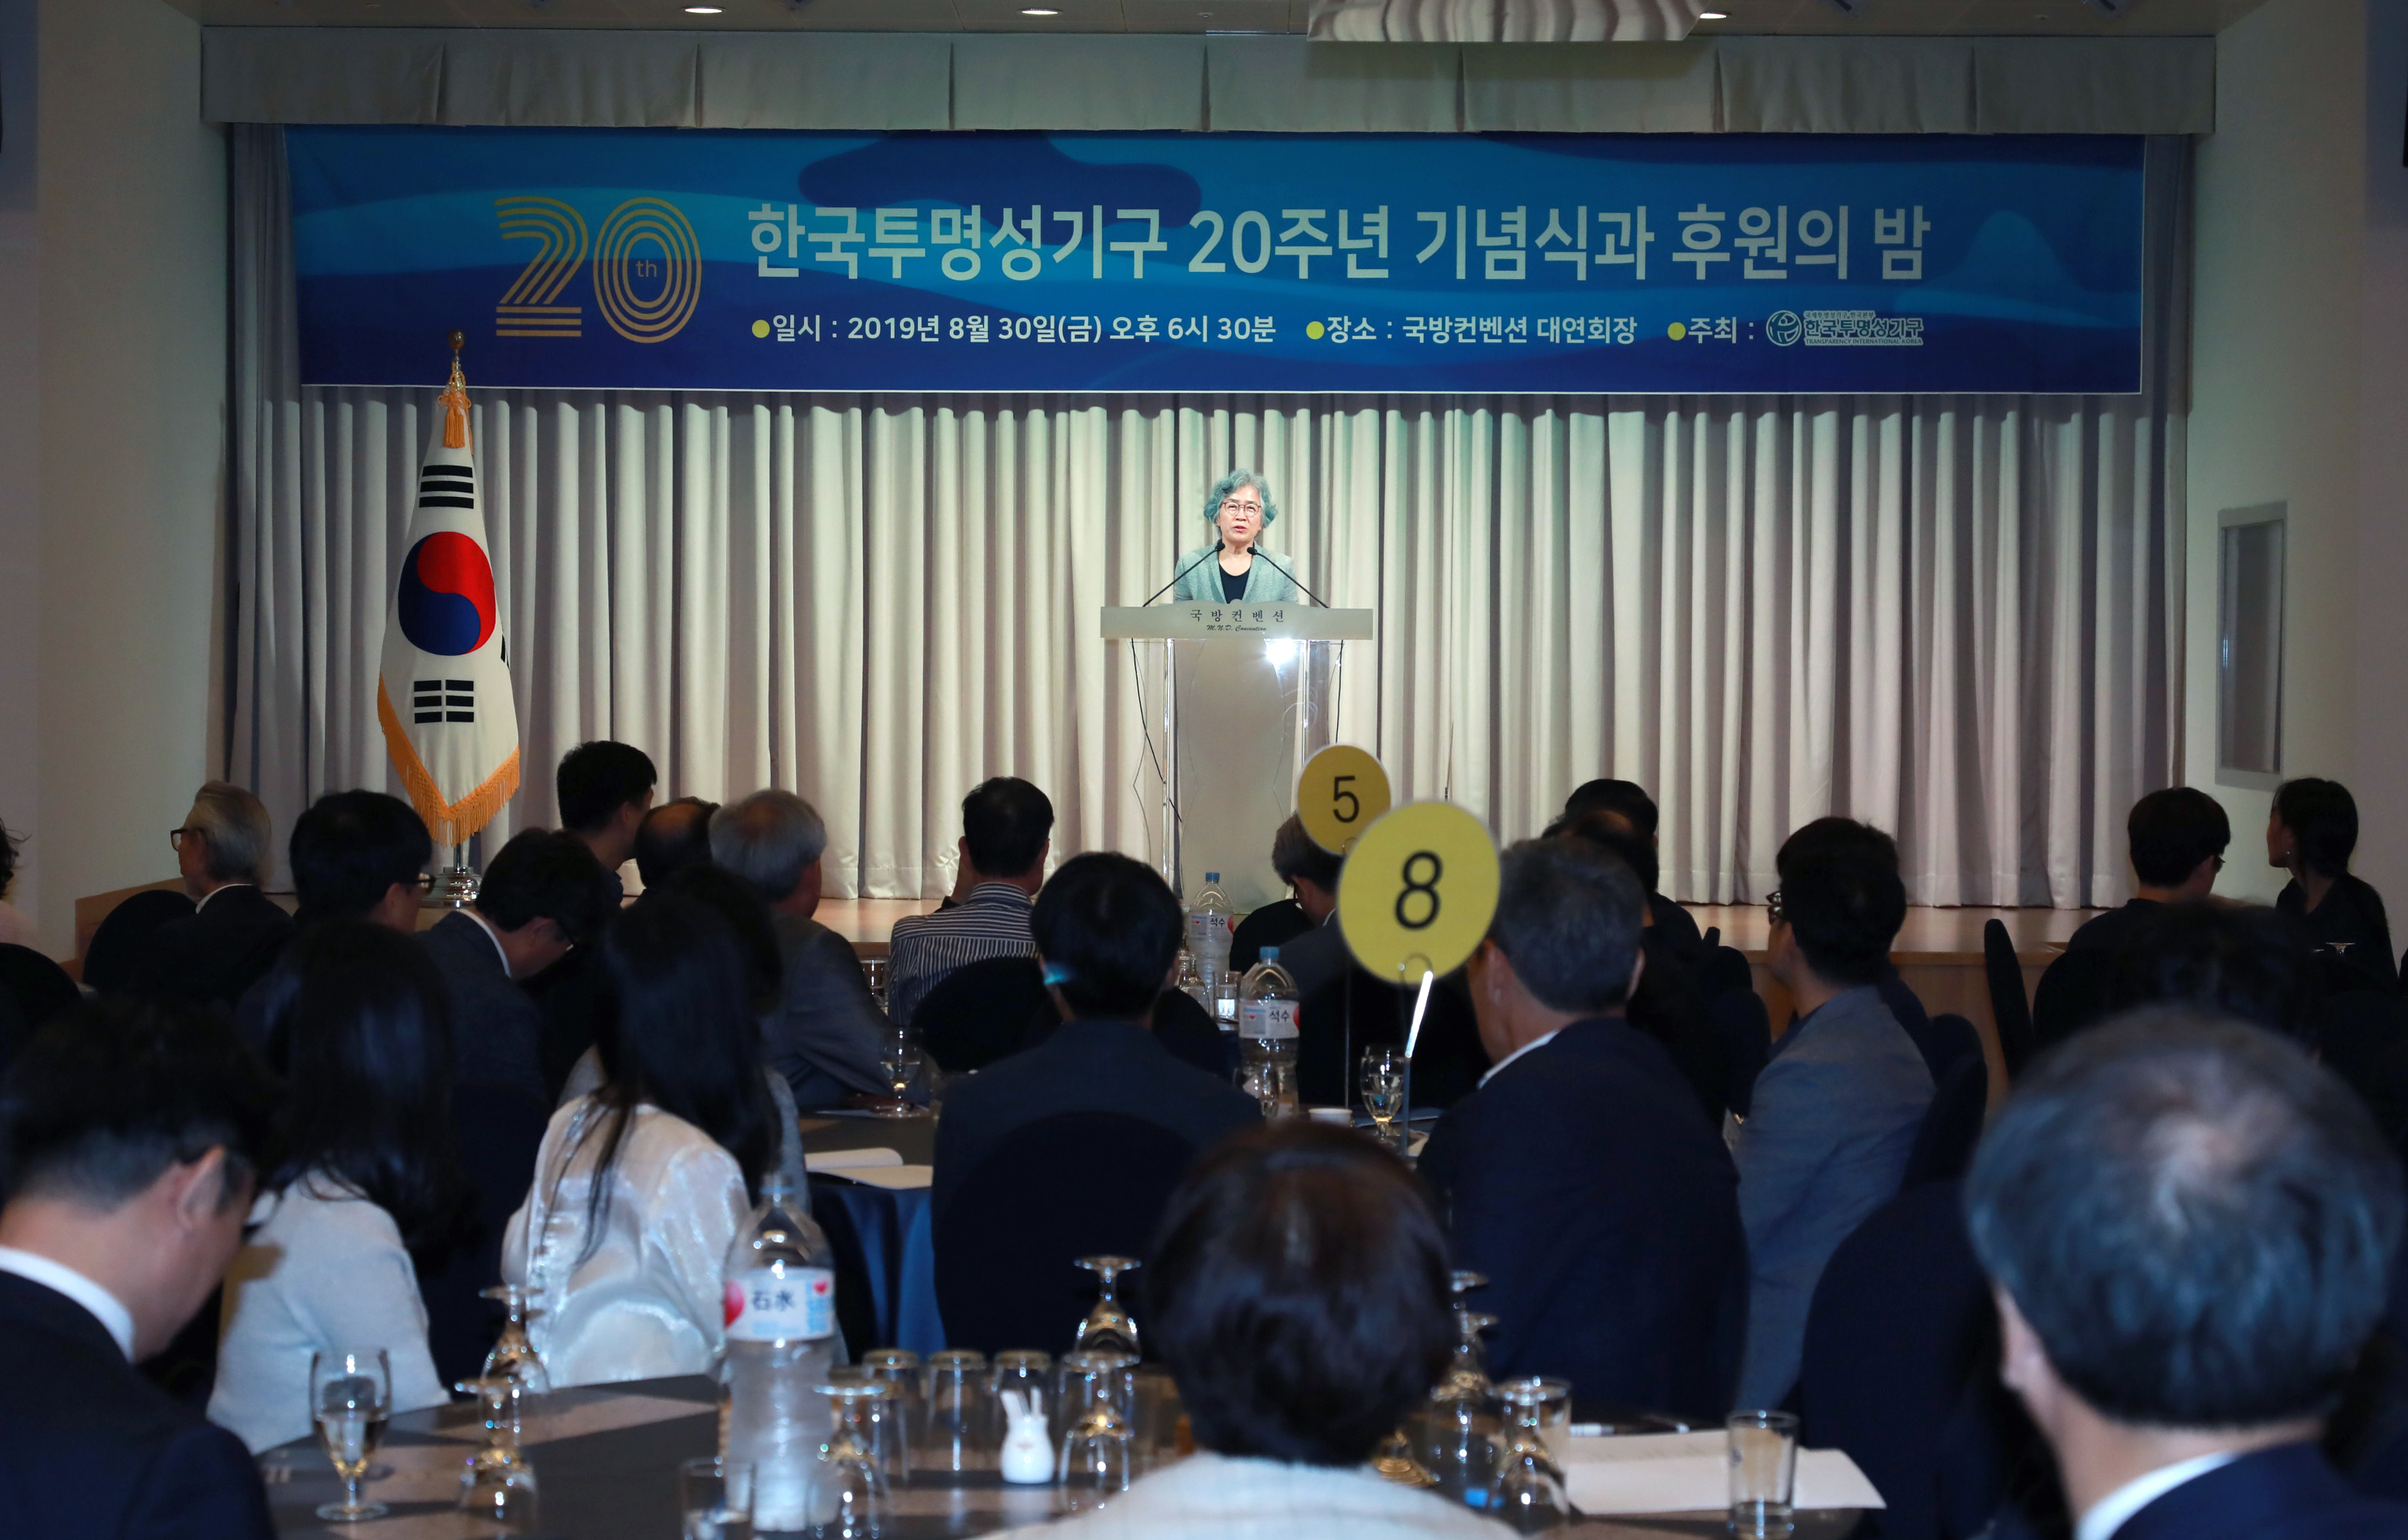 ACRC Chairperson attended Transparency International Korea’s 20th anniversary event